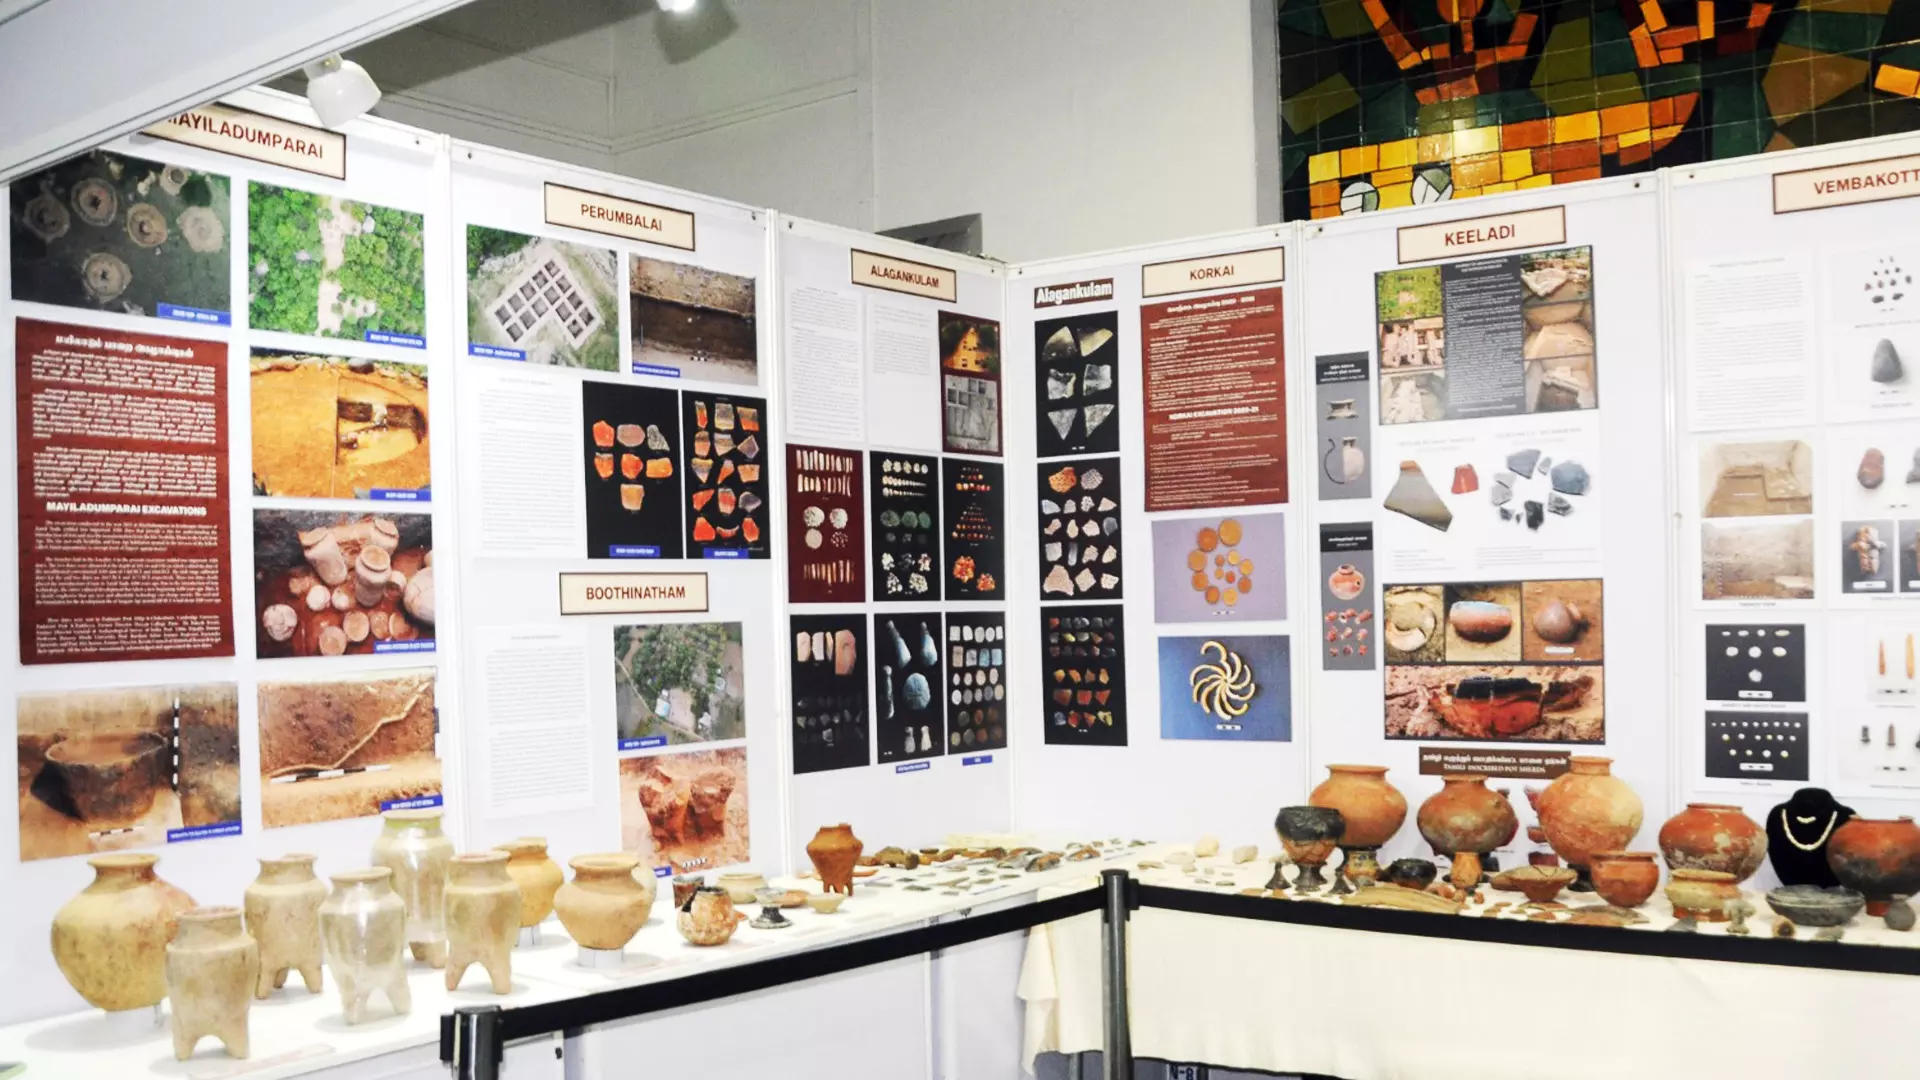 An exhibition of ancient pottery displayed as part of the conference.